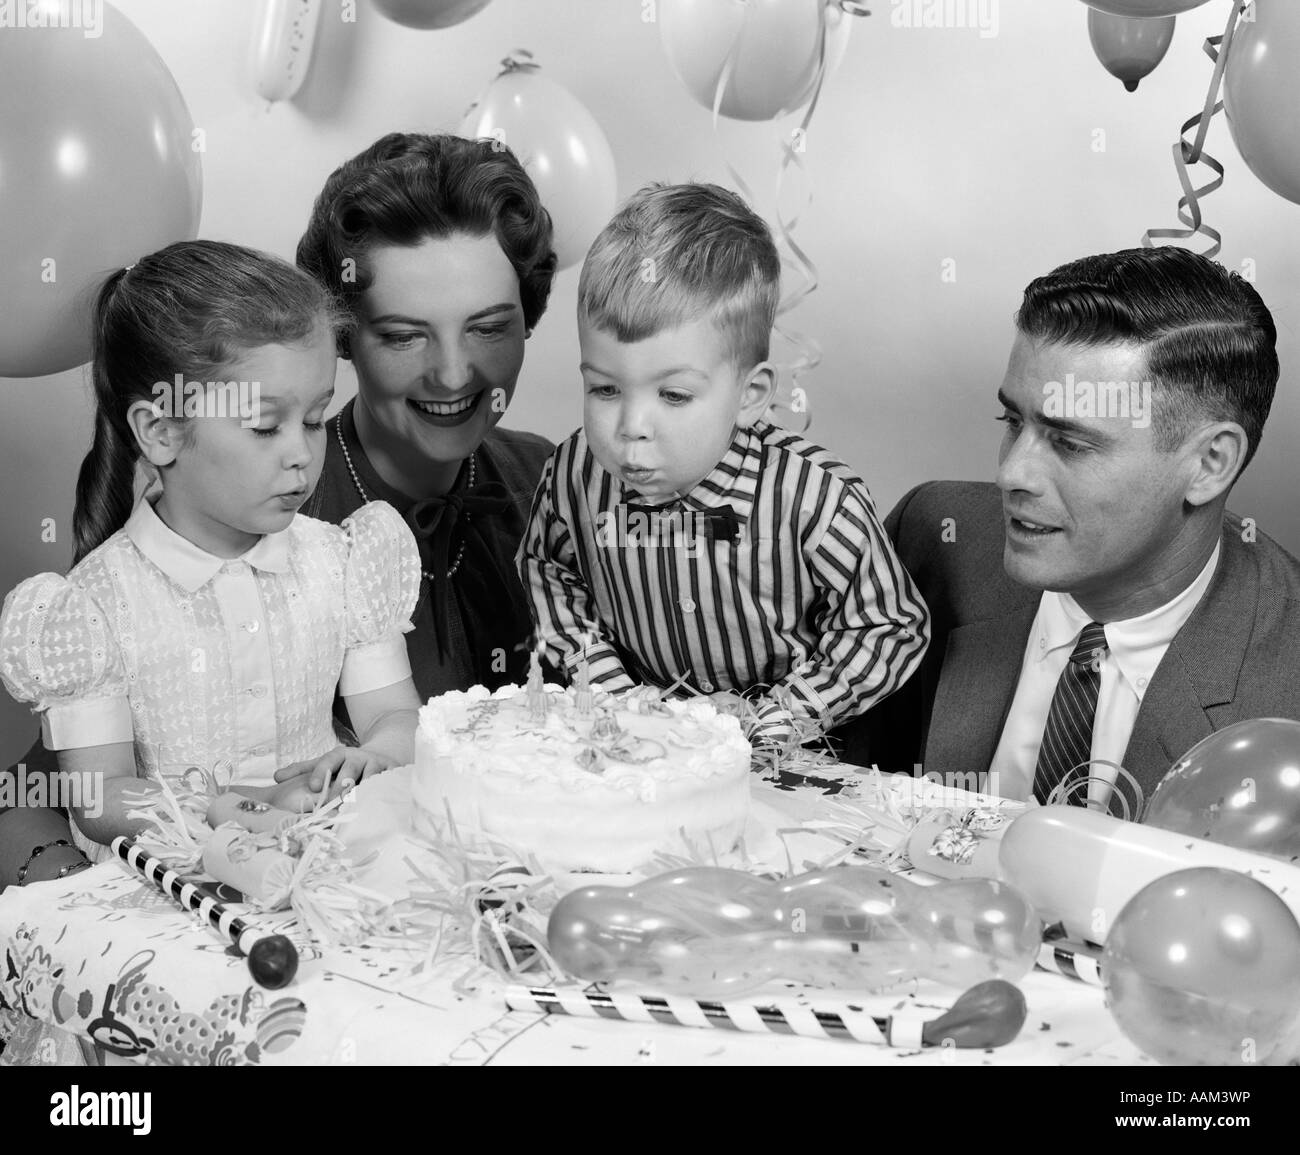 1950s CLOSE-UP OF FAMILY OF 4 WITH SON BLOWING OUT 2 CANDLES ON HIS BIRTHDAY CAKE Stock Photo